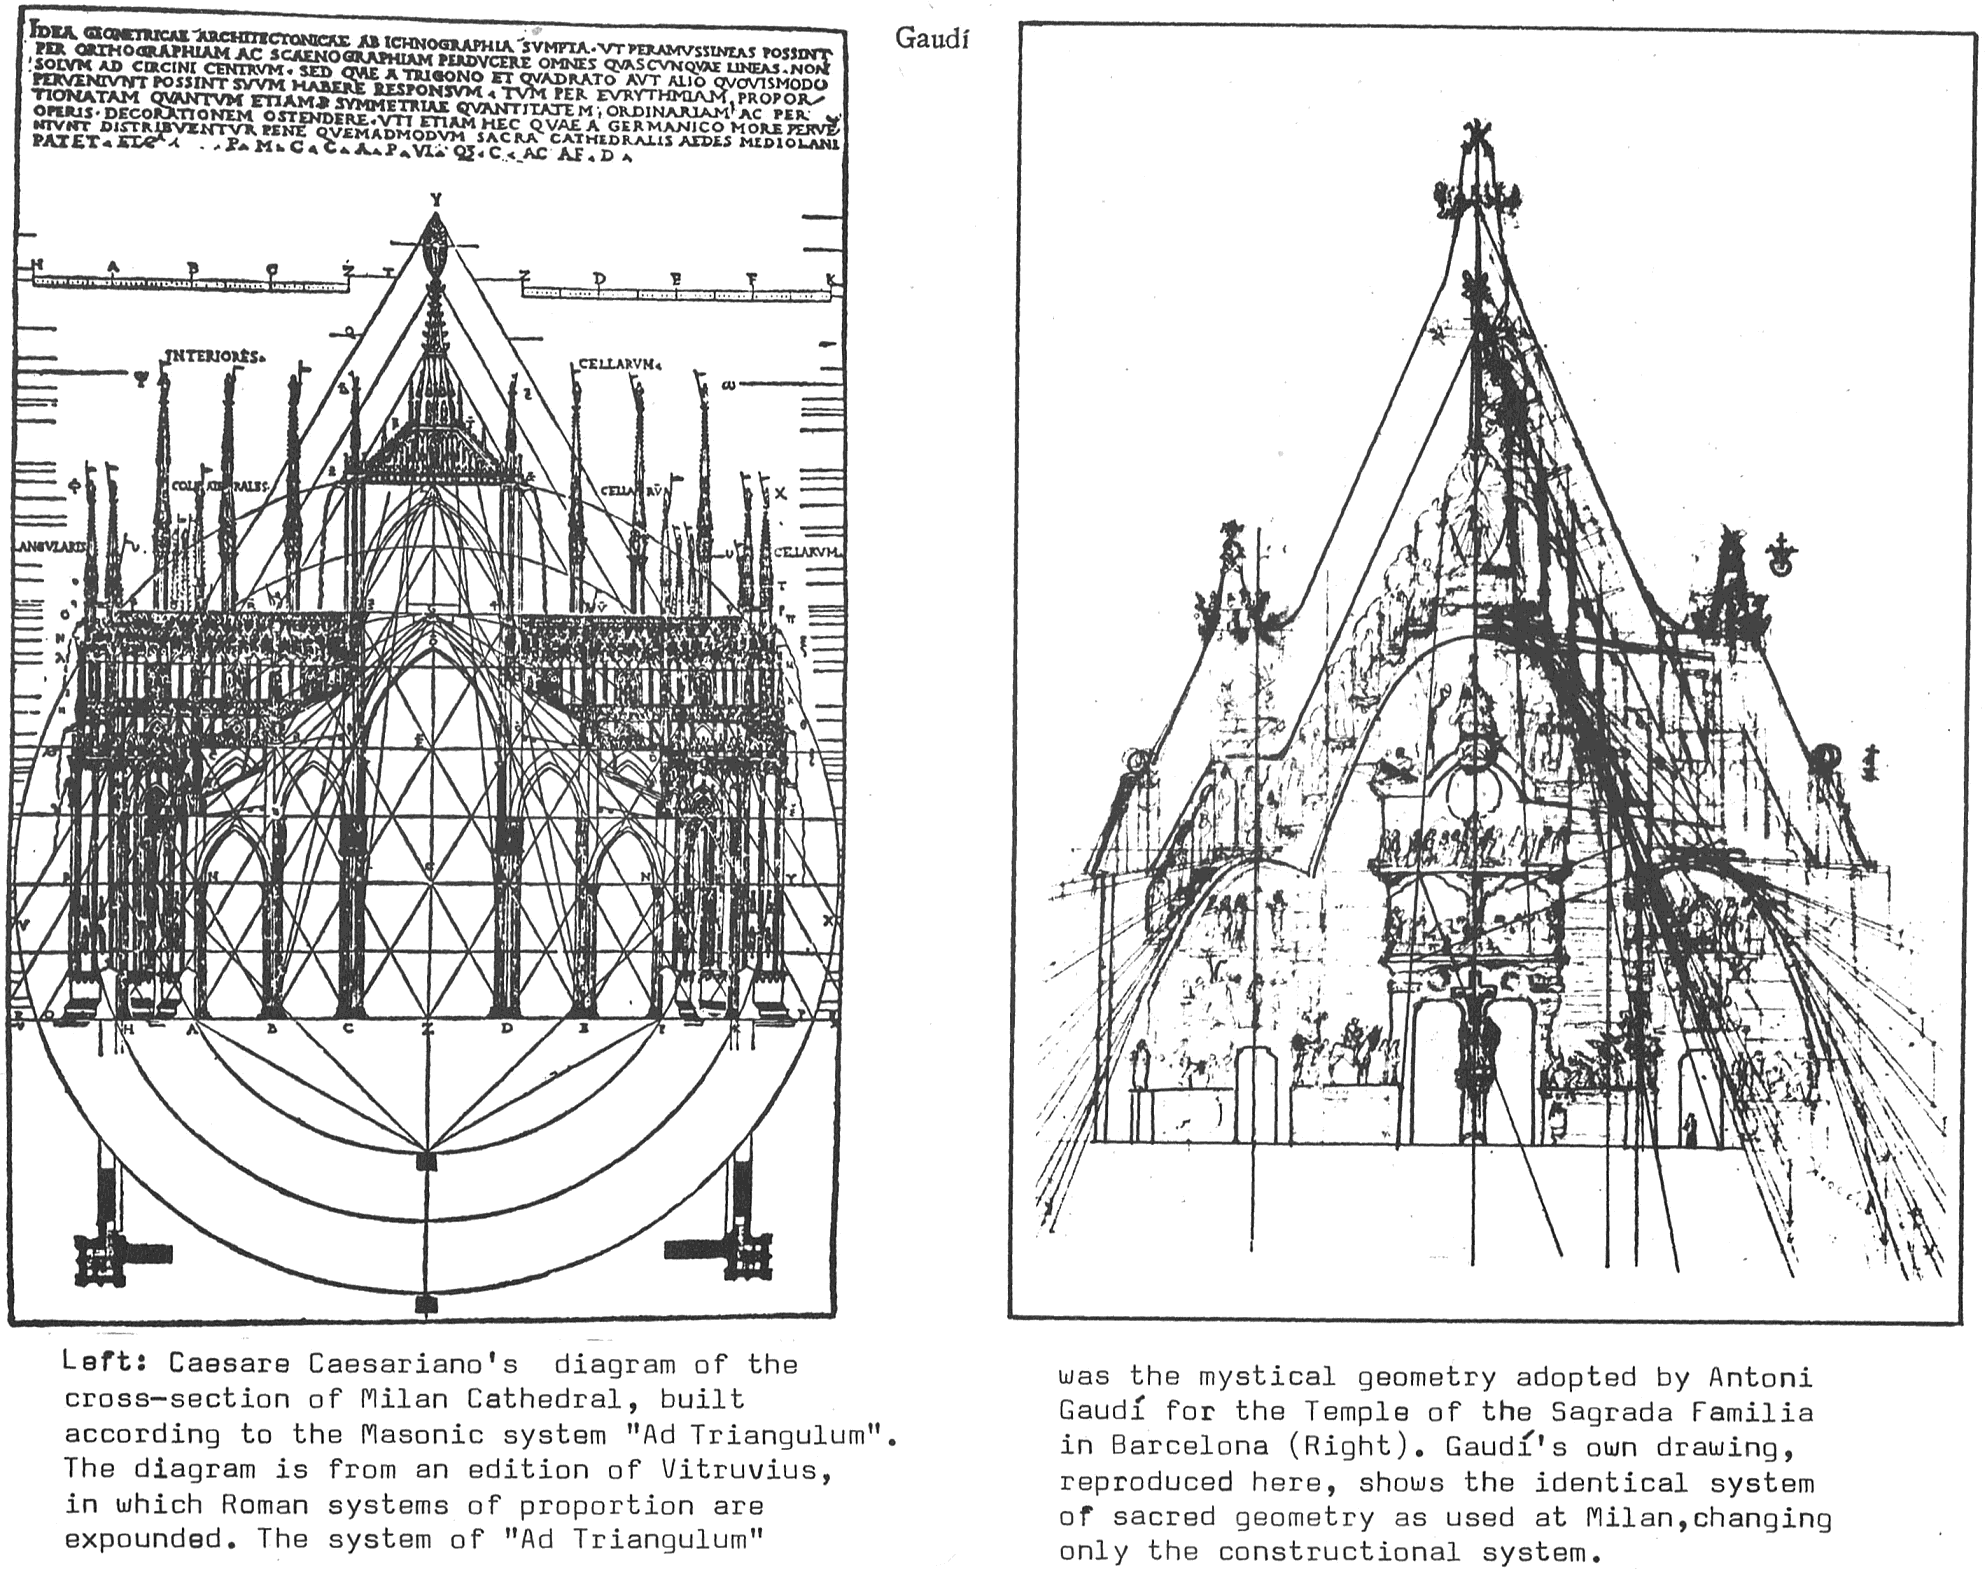 Plans by Caesariano and Gaudi